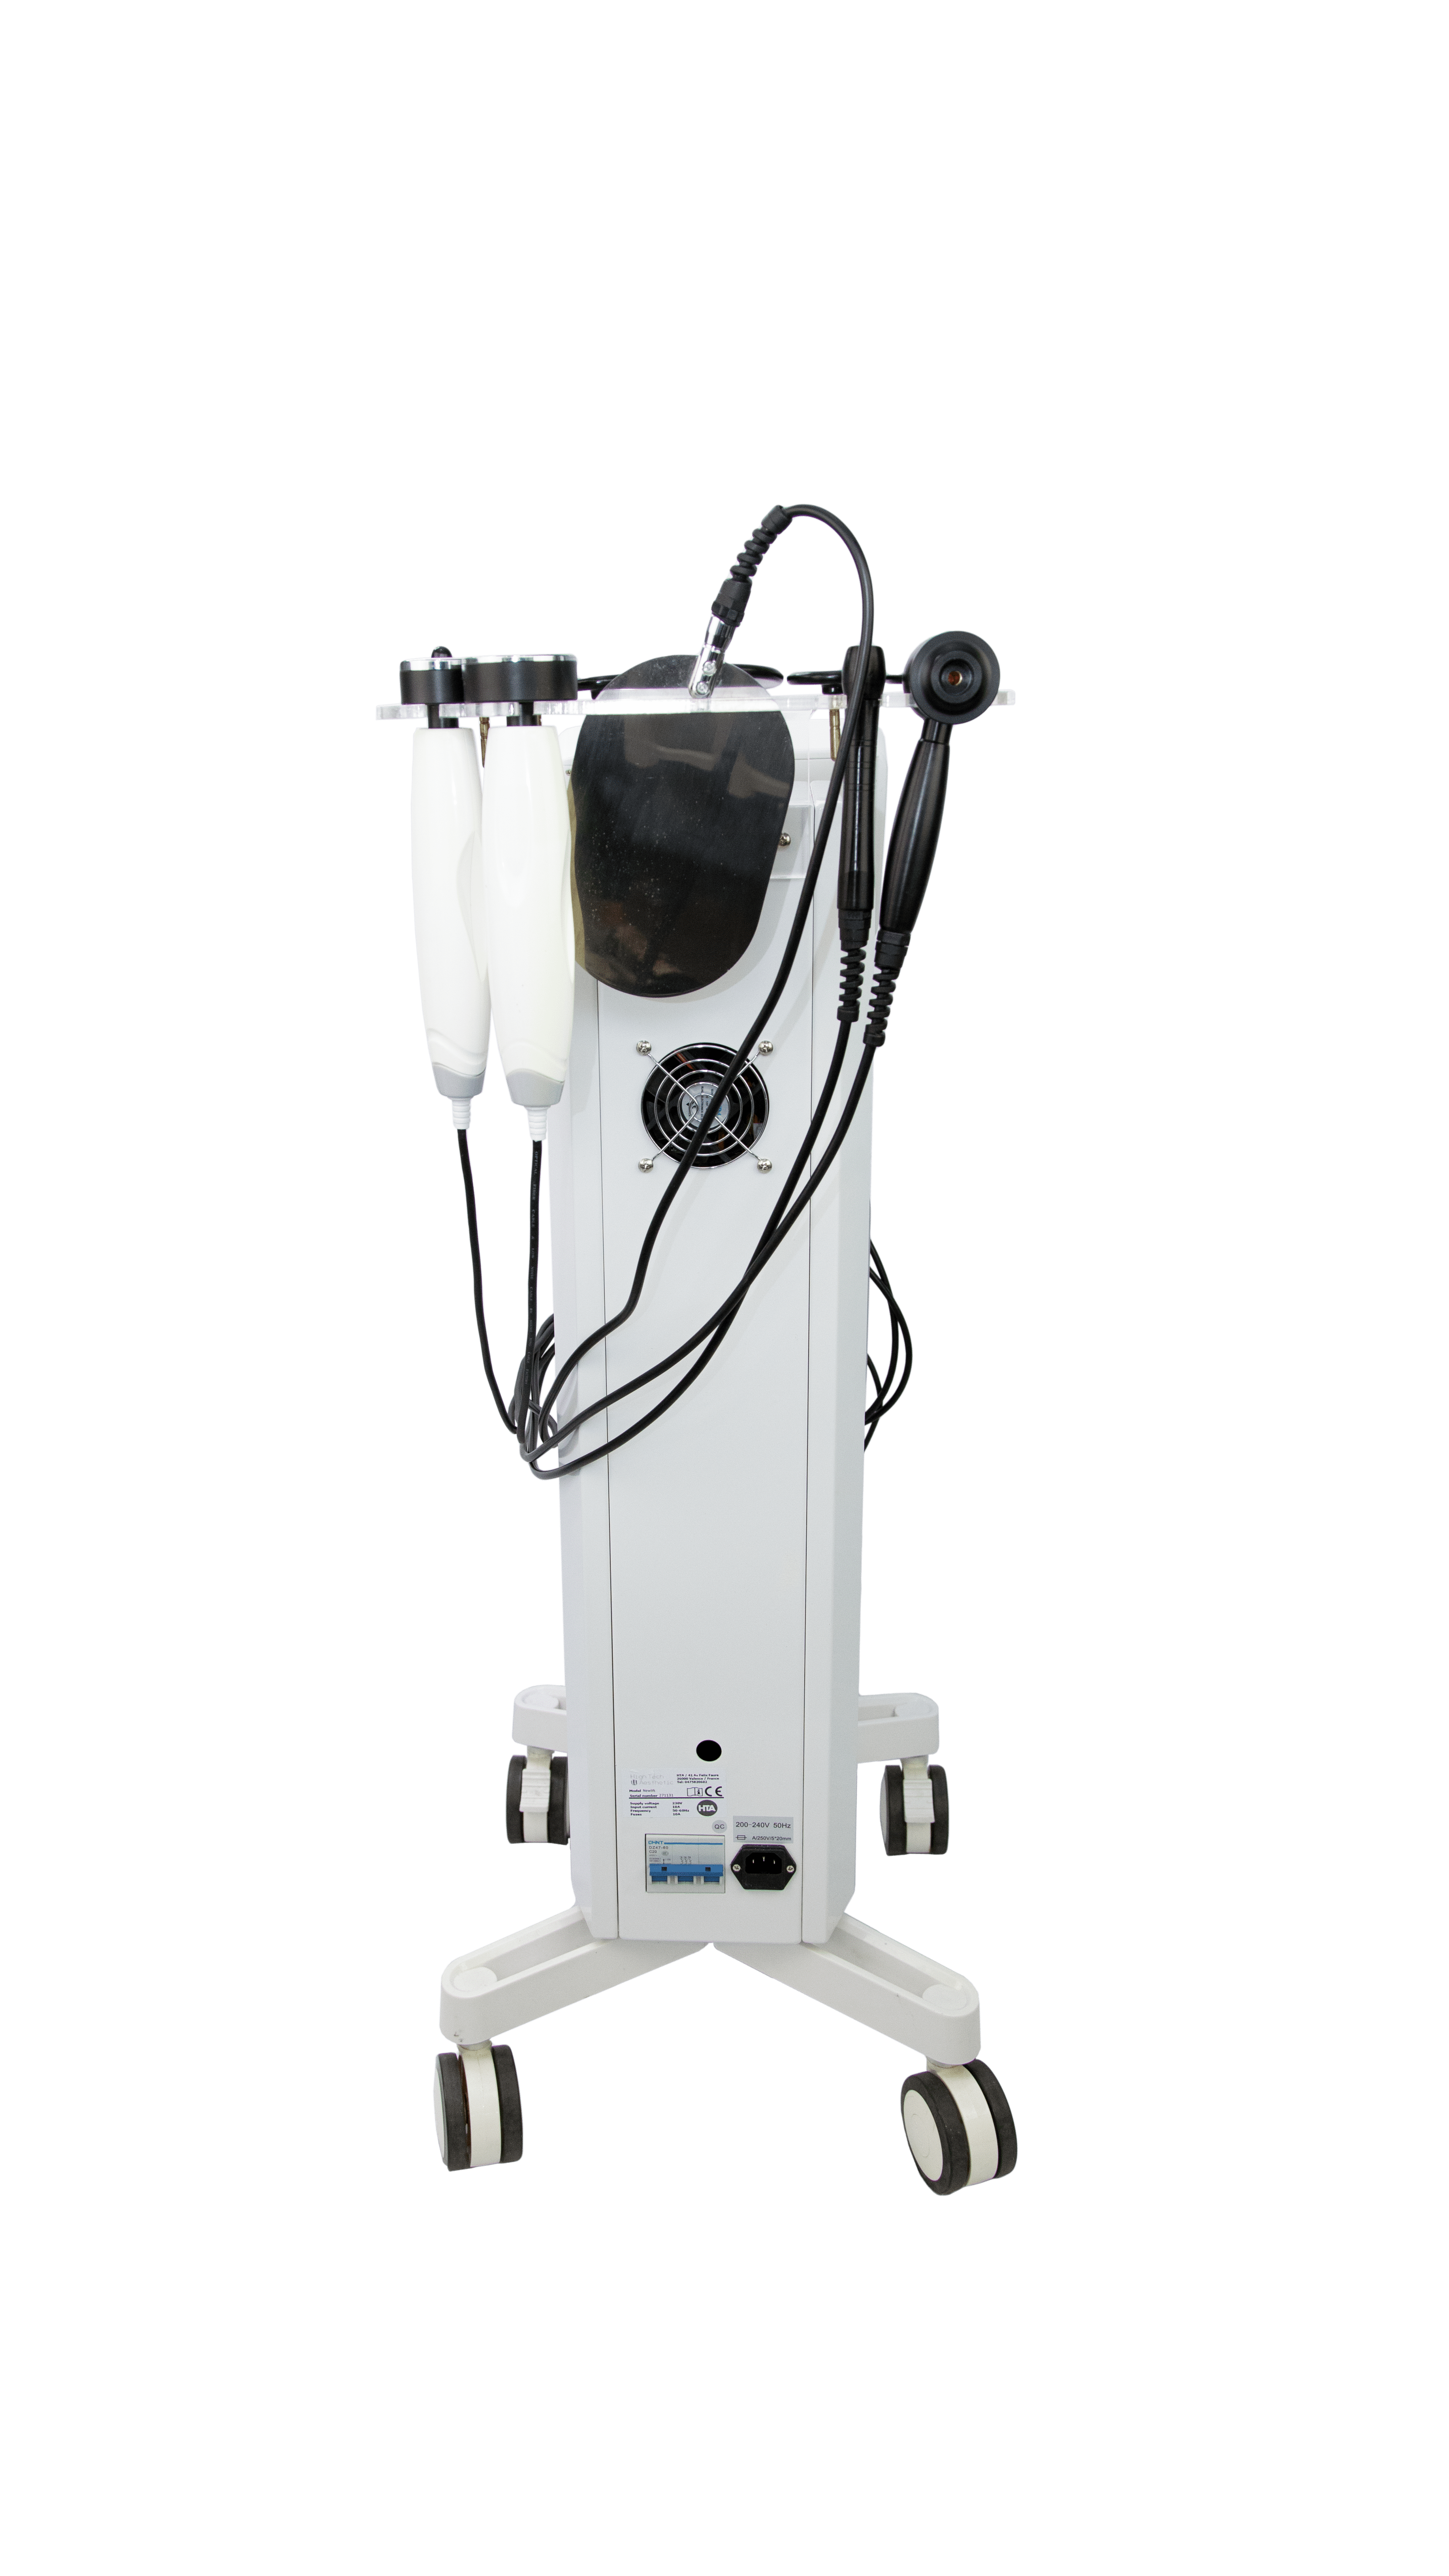 Radiofrequency anti-aging device - Available in 2 formats